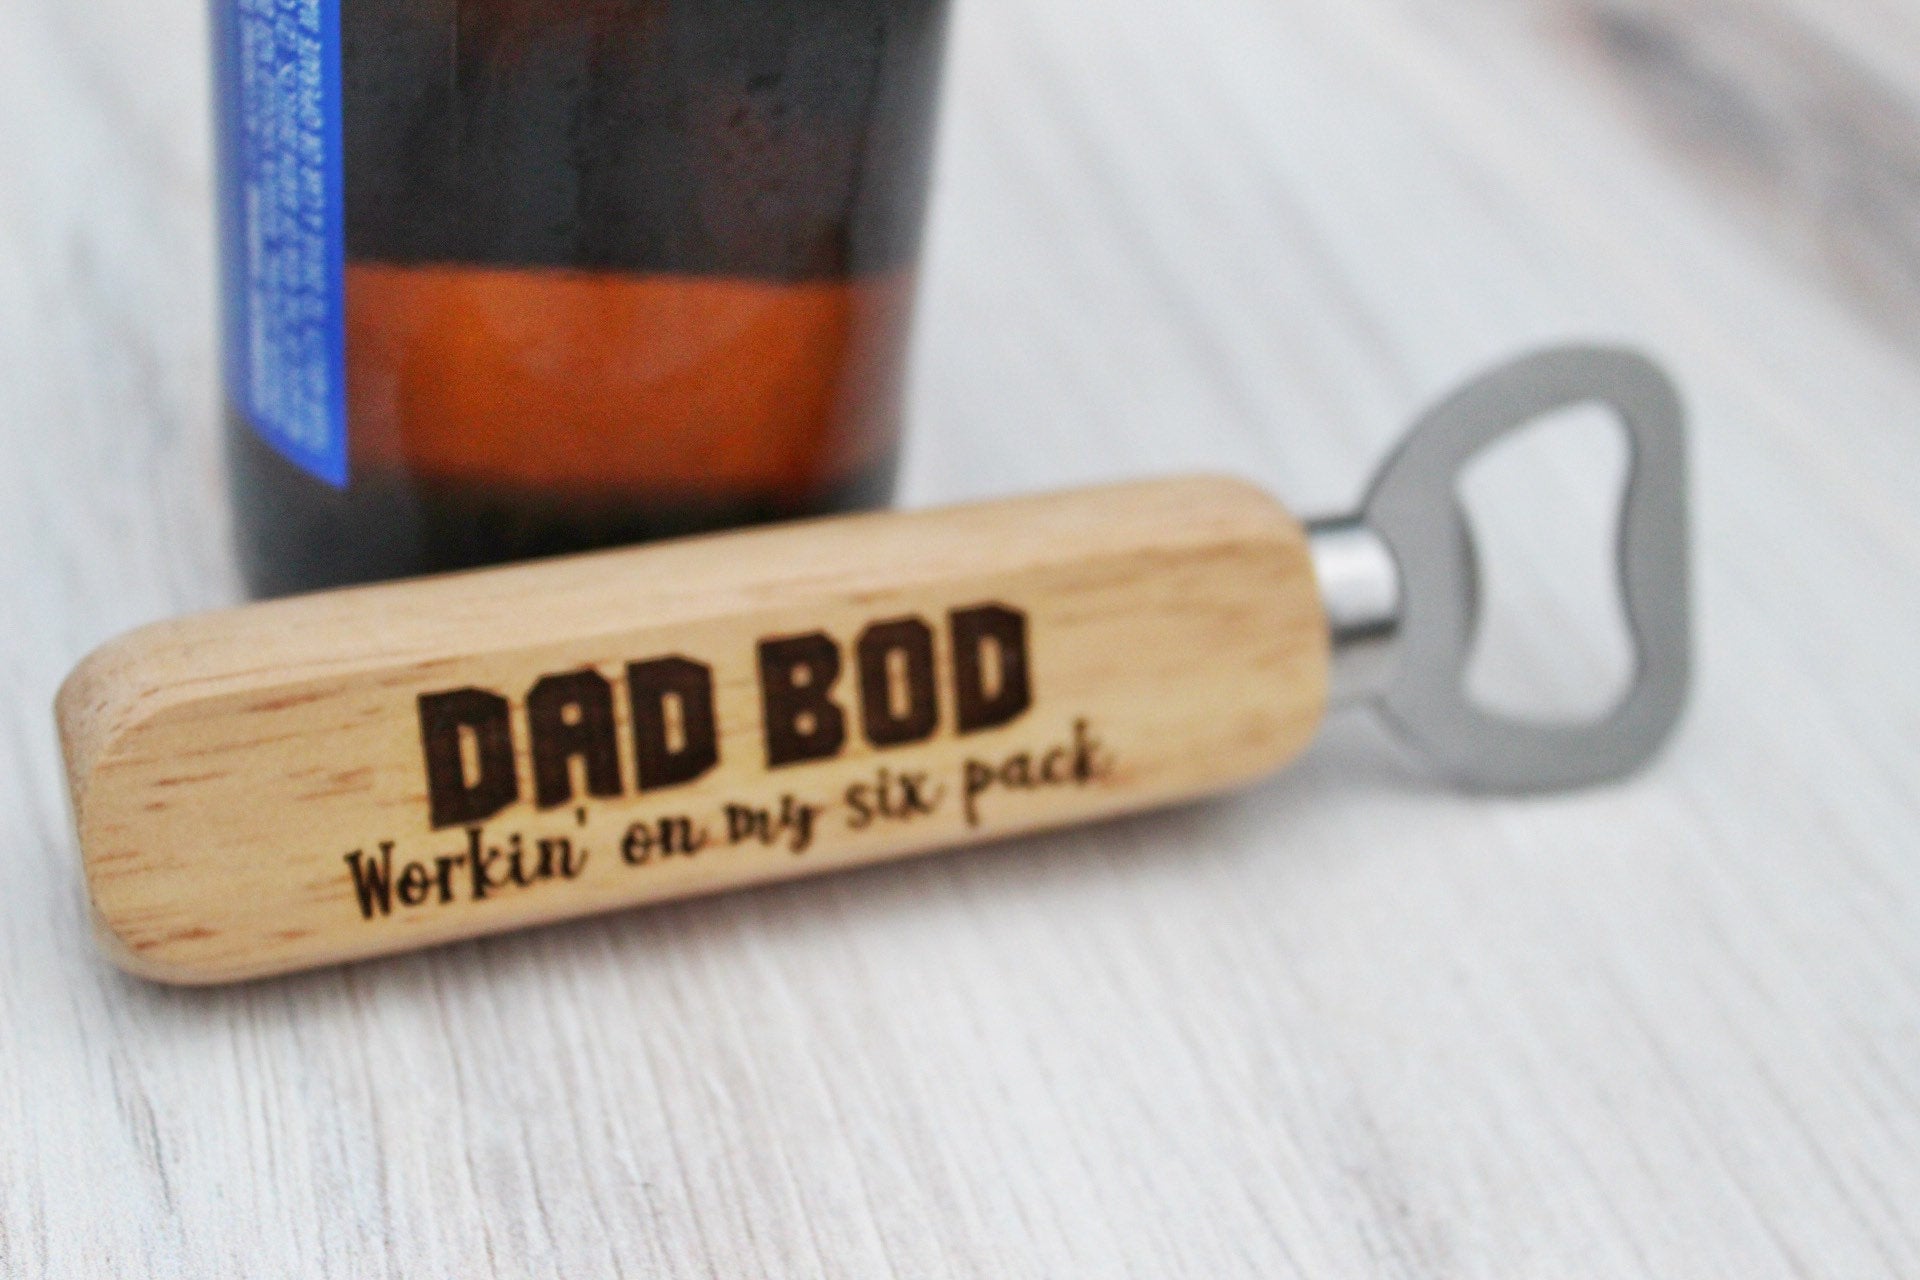 Dad Bod Workin’ On My Six Pack Funny Wooden Bottle Opener Party Favor Gift For Him, Personalized Funny Husband Beer Gift